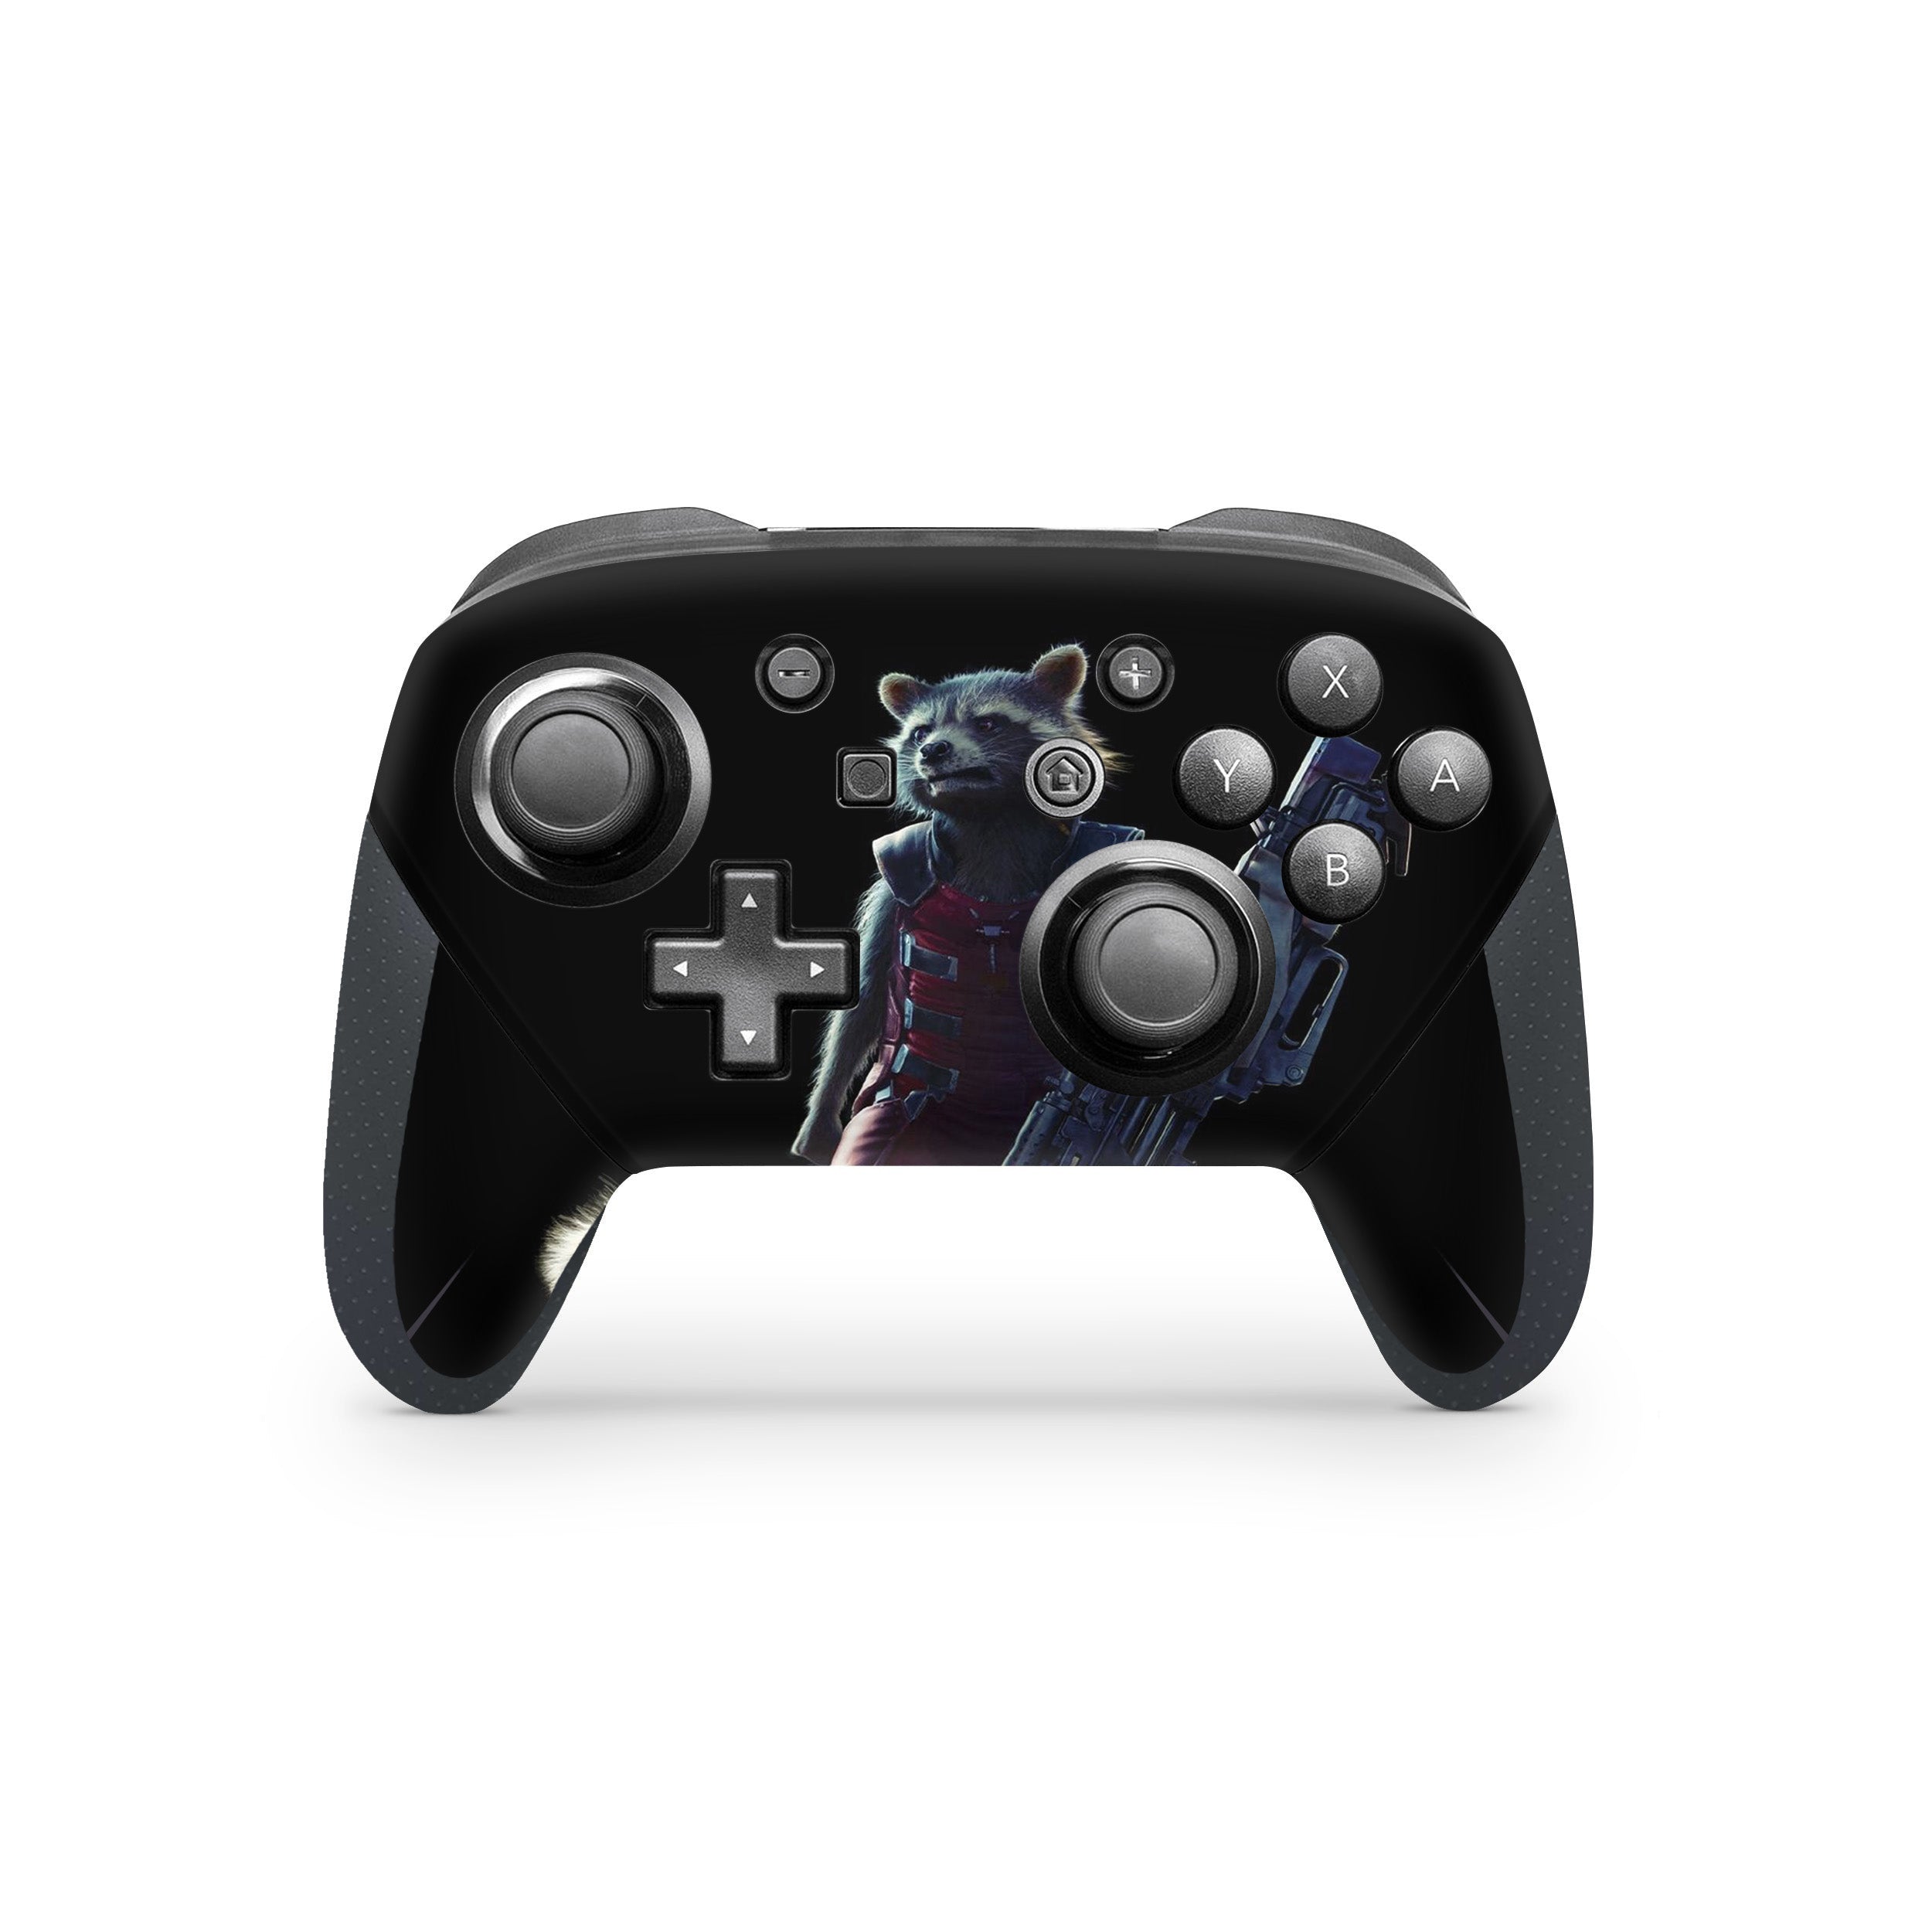 A video game skin featuring a Marvel Guardians of the Galaxy Rocket design for the Switch Pro Controller.